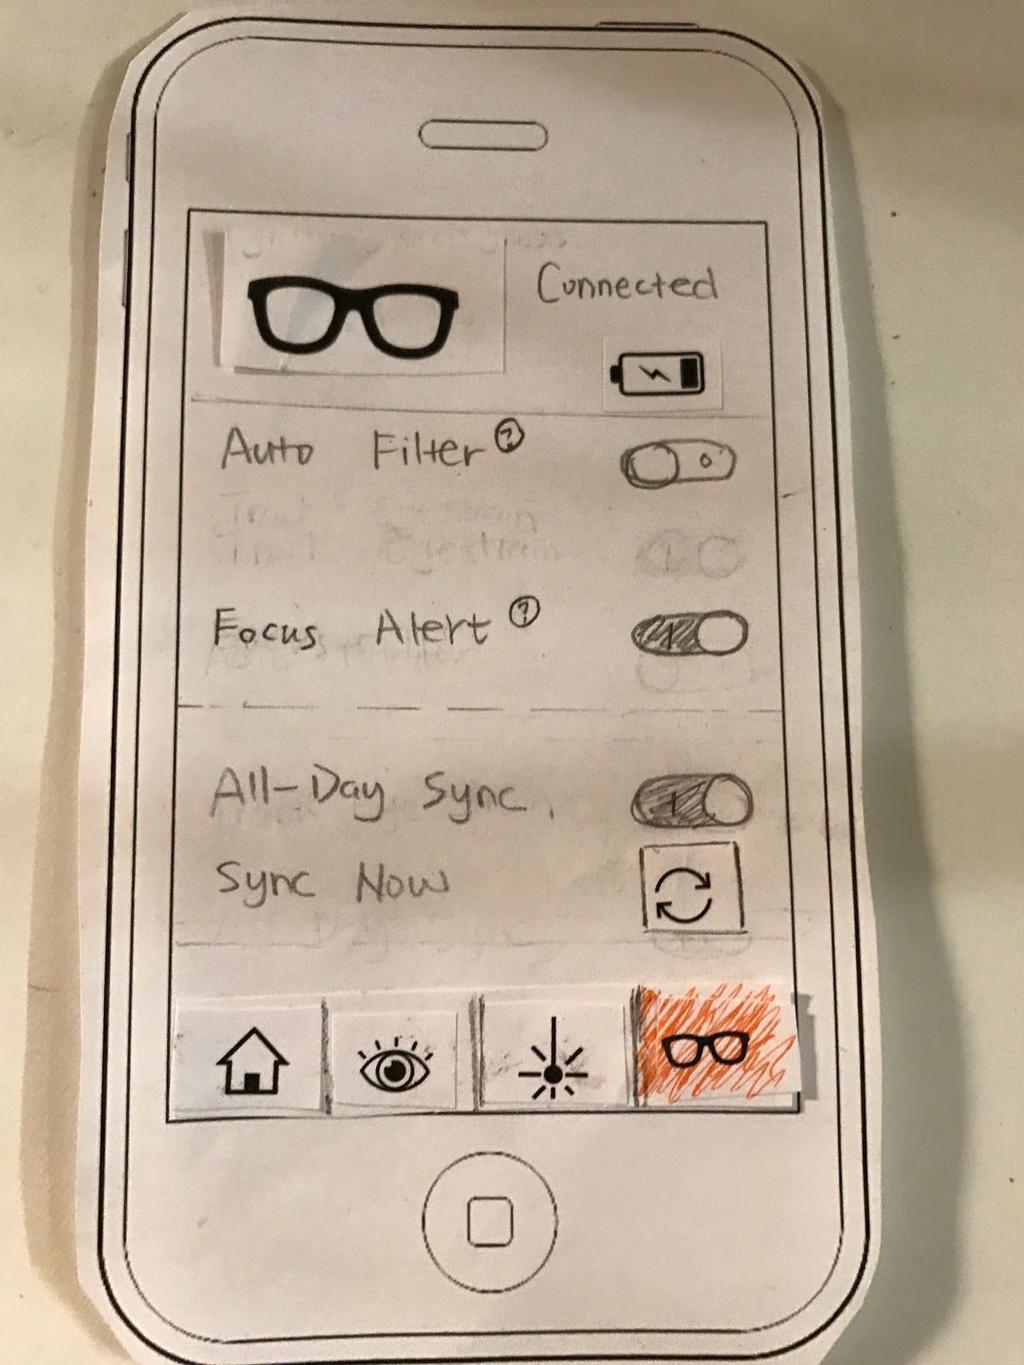 After the device is correctly connected, we will go to the settings page, in which the users could enable/disable some features of the smartglasses. Discussion of Key Revisions in Design Process 1.